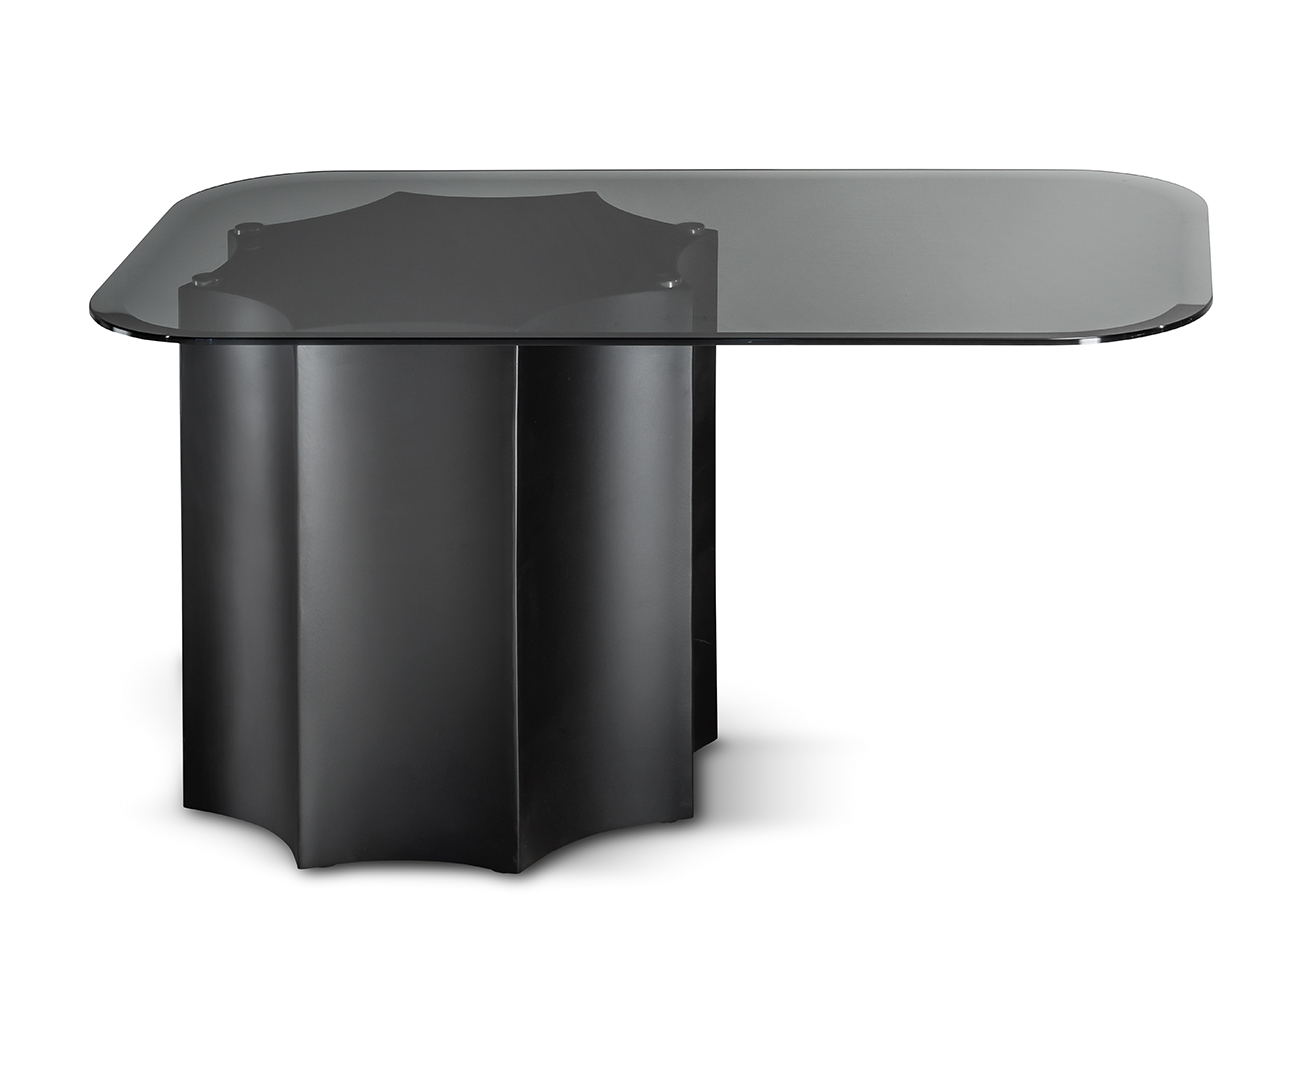 Florio high coffee and side tables - Cantori